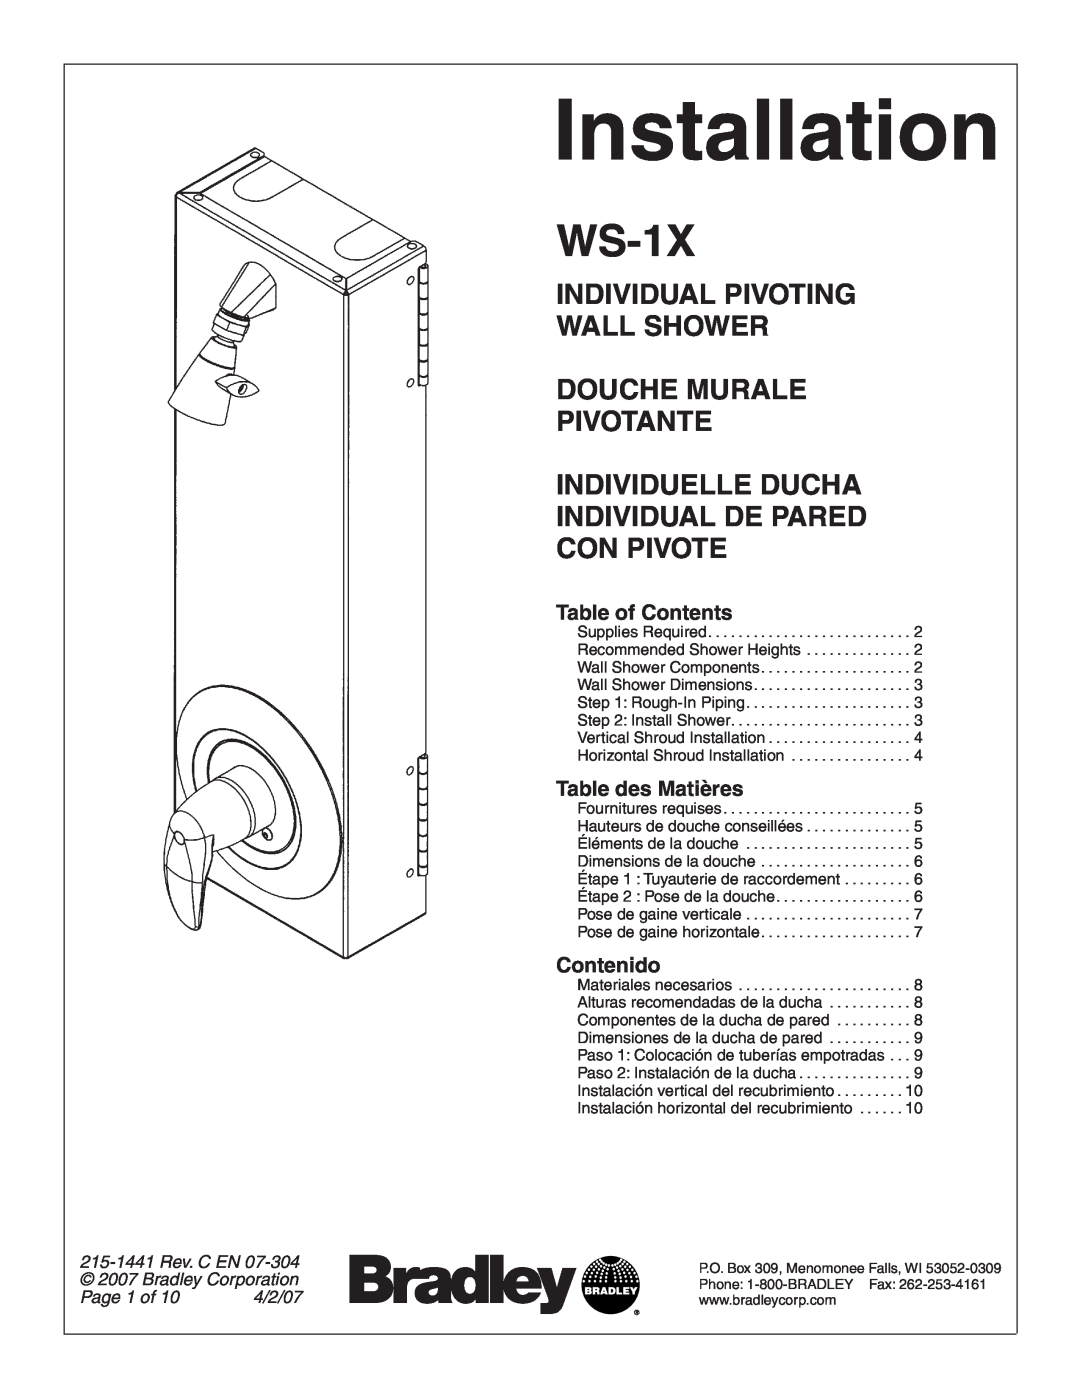 Bradley Smoker WS-1X dimensions Table of Contents, Table des Matières, Contenido, Installation, Page 1 of, 4/2/07 